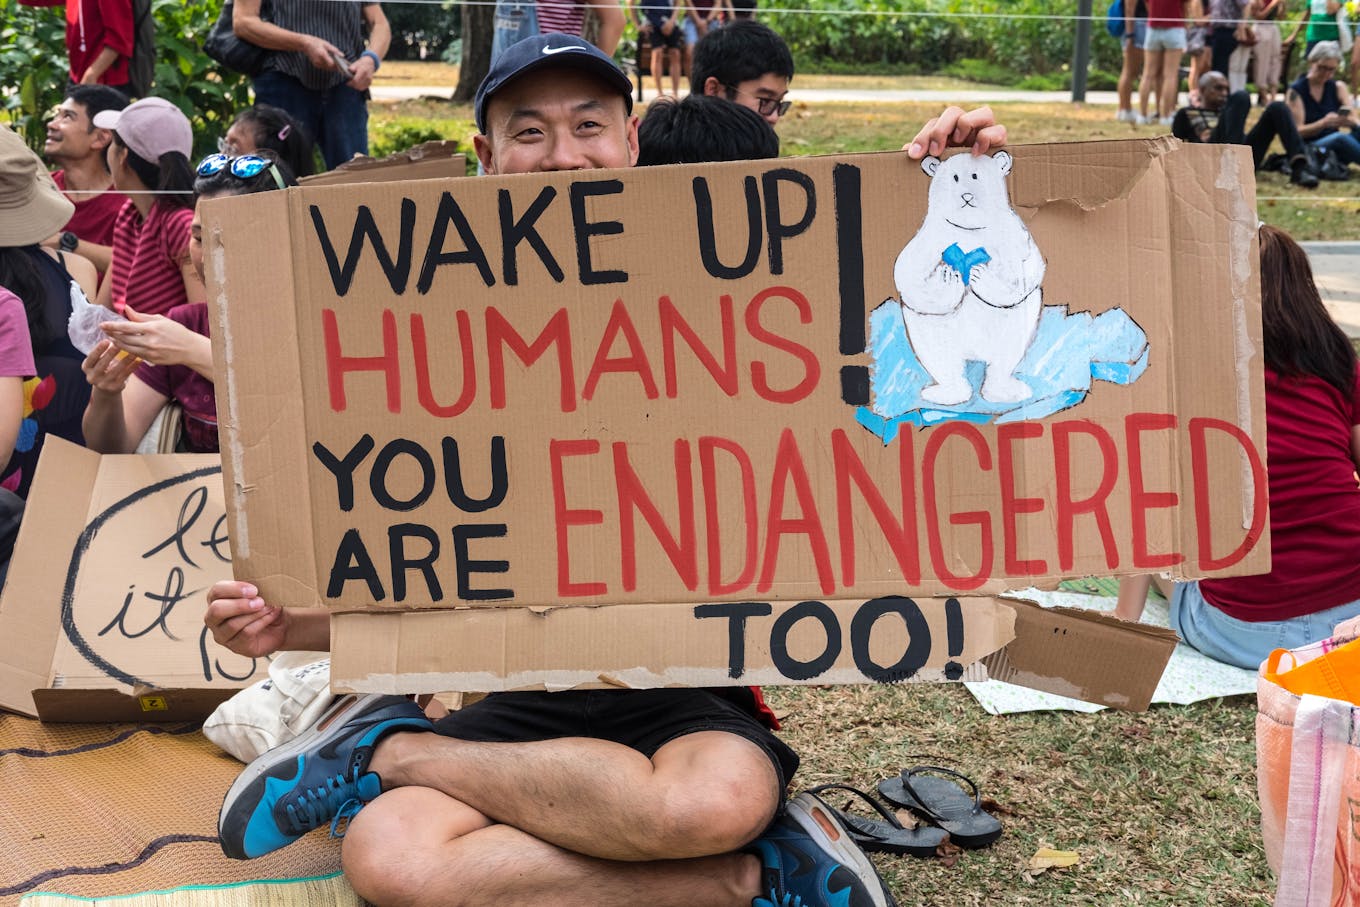 "Wake up humans" rallier at SG Climate Rally